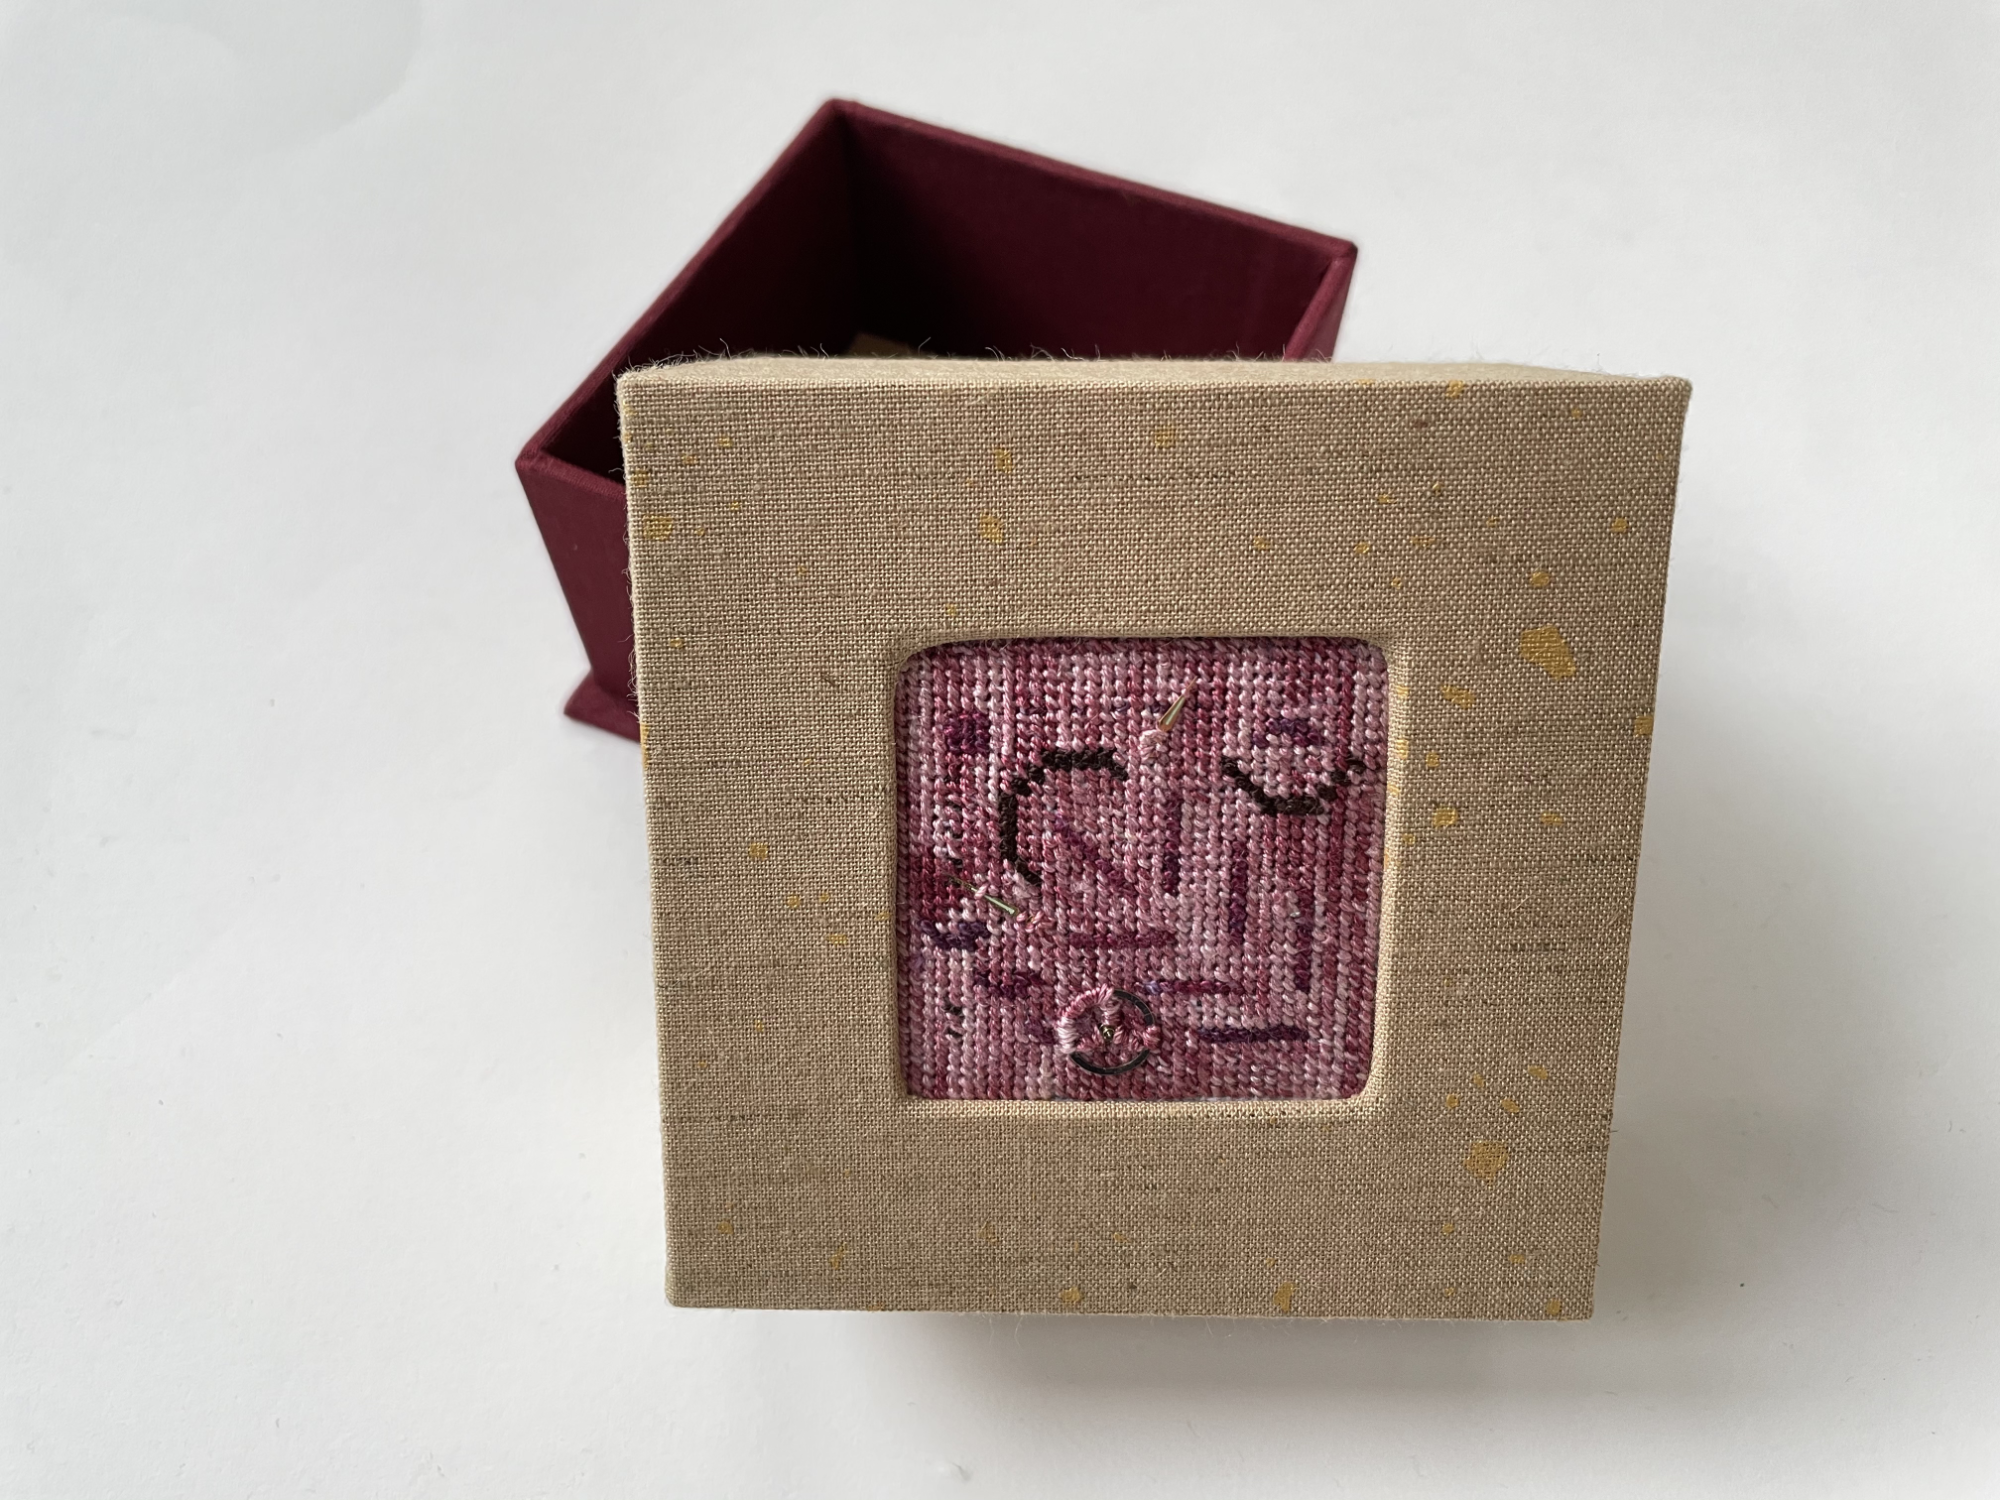 a box with an inset abstract needlepoint with watch hands and gear